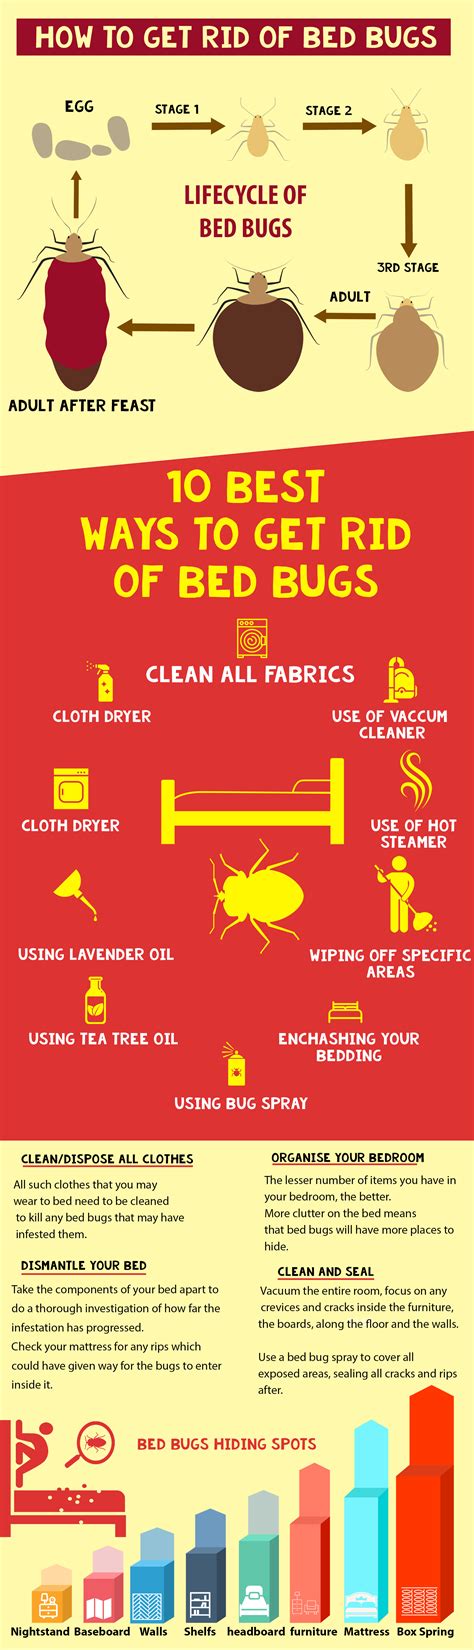 How To Get Rid Of Bed Bugs Quickly Bed Bugs Rid Of Bed Bugs Bed Bug Images